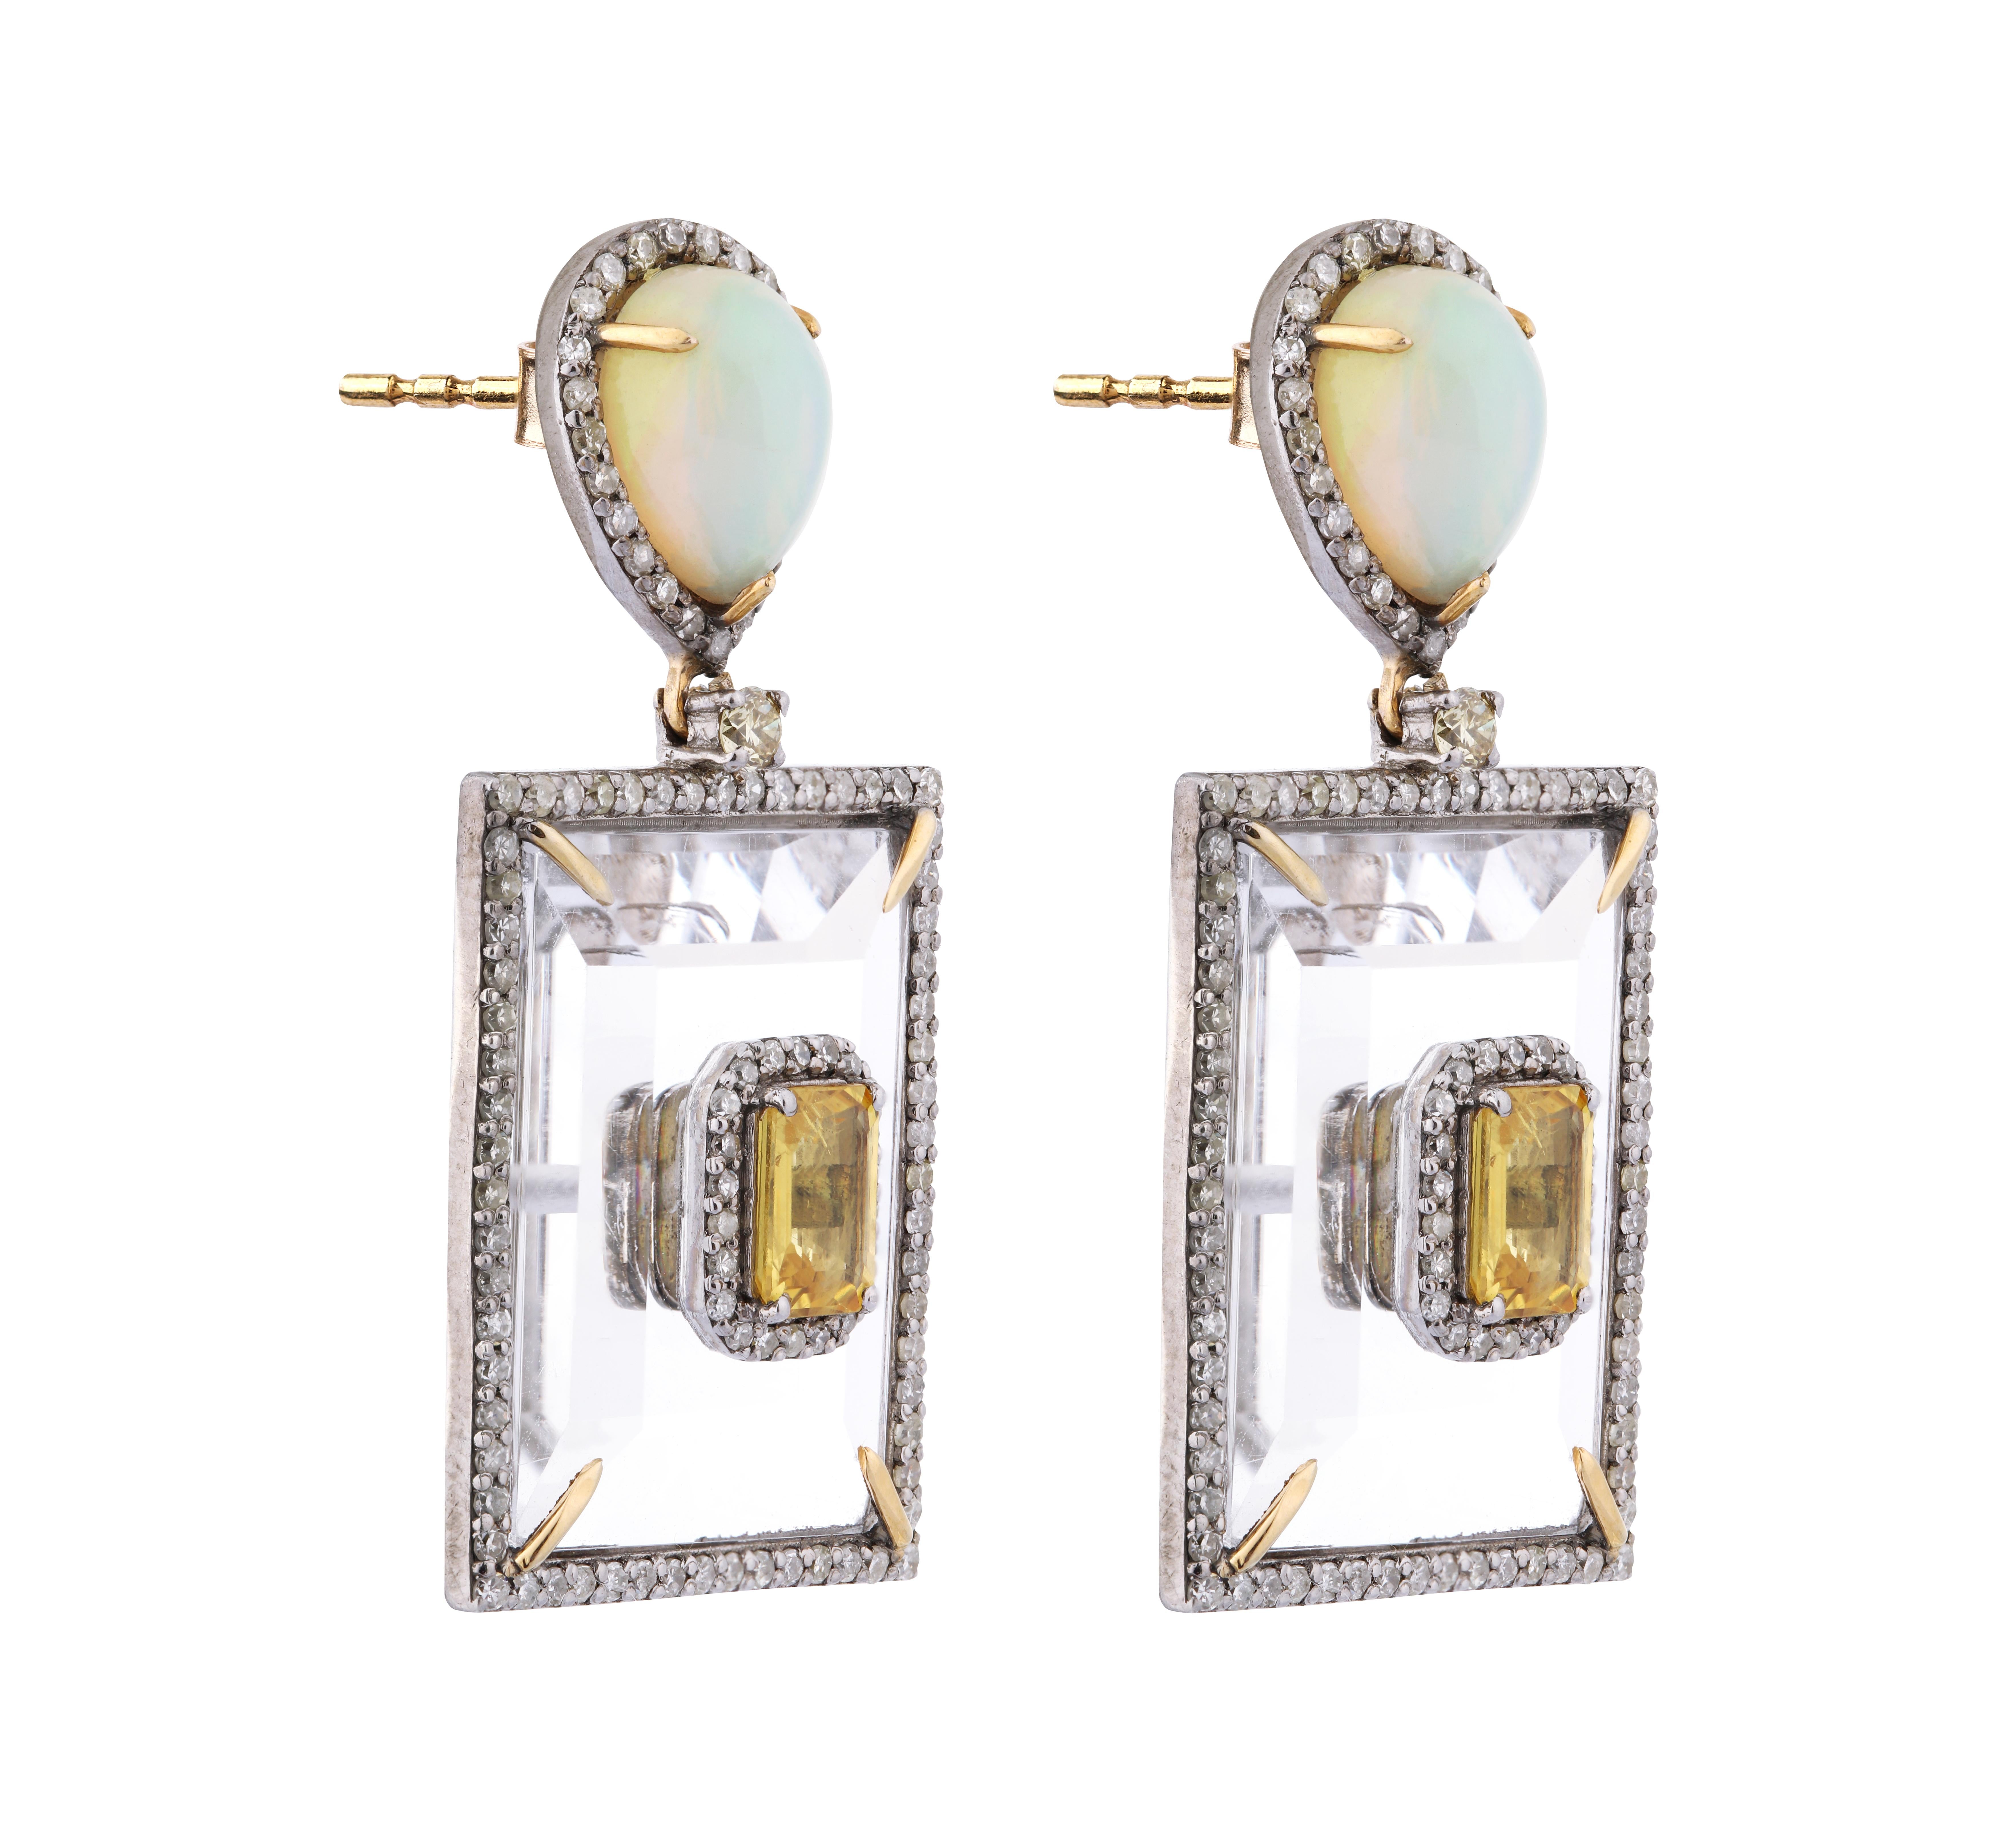 22.19 Carats Crystal, Diamond, Opal, and Yellow Sapphire Dangle Earrings For Sale 1